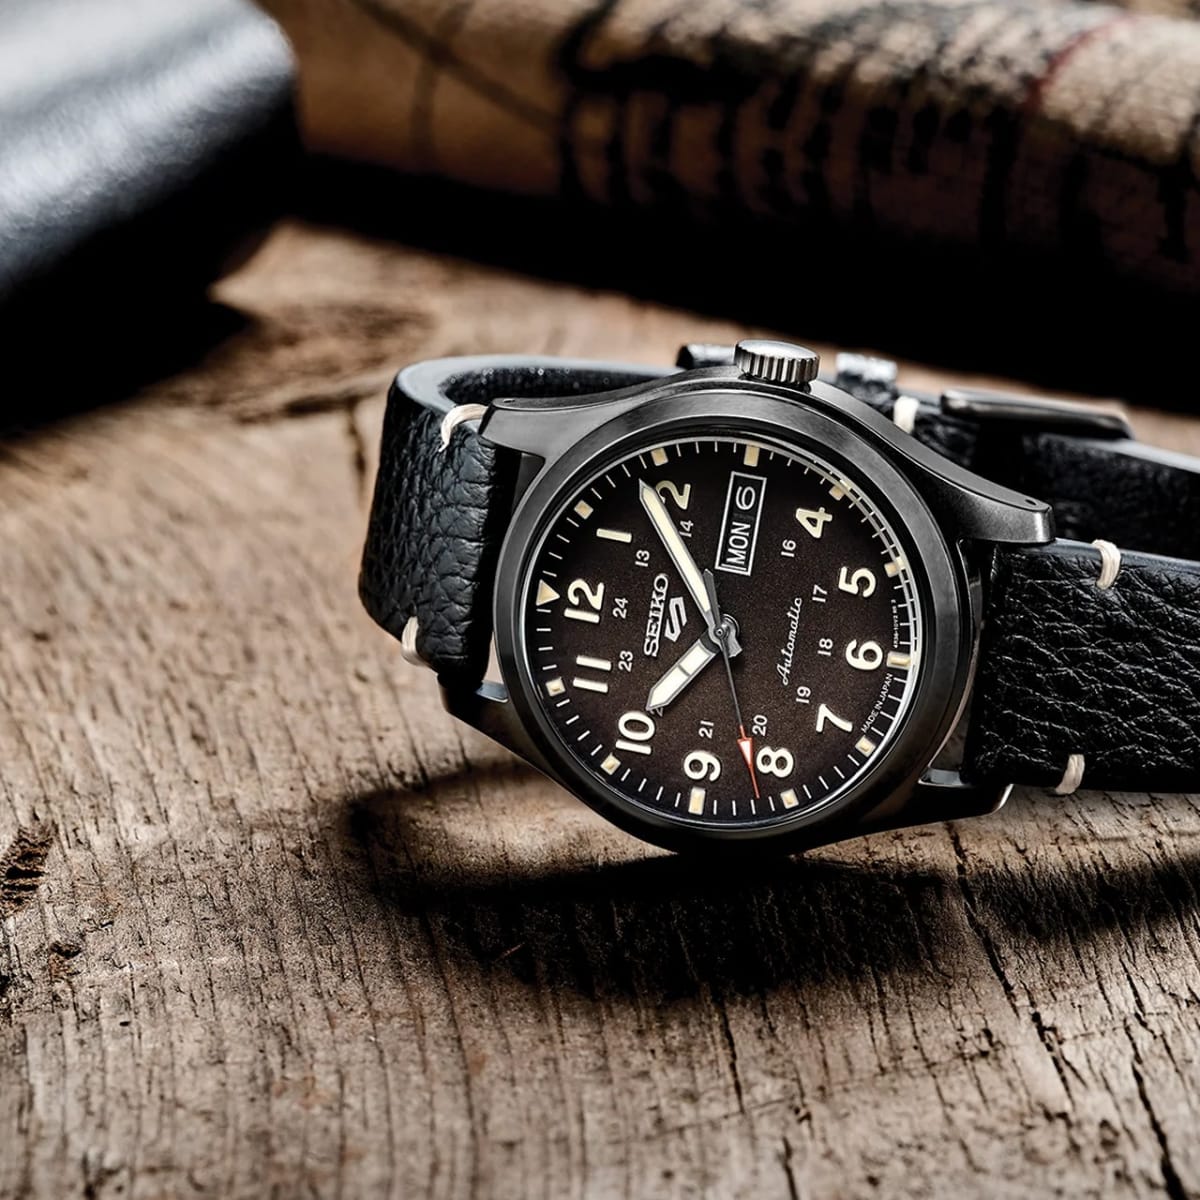 mandat Diktatur Være Things We Want: Seiko's Modern Take on the WWII Military Watch - Airows